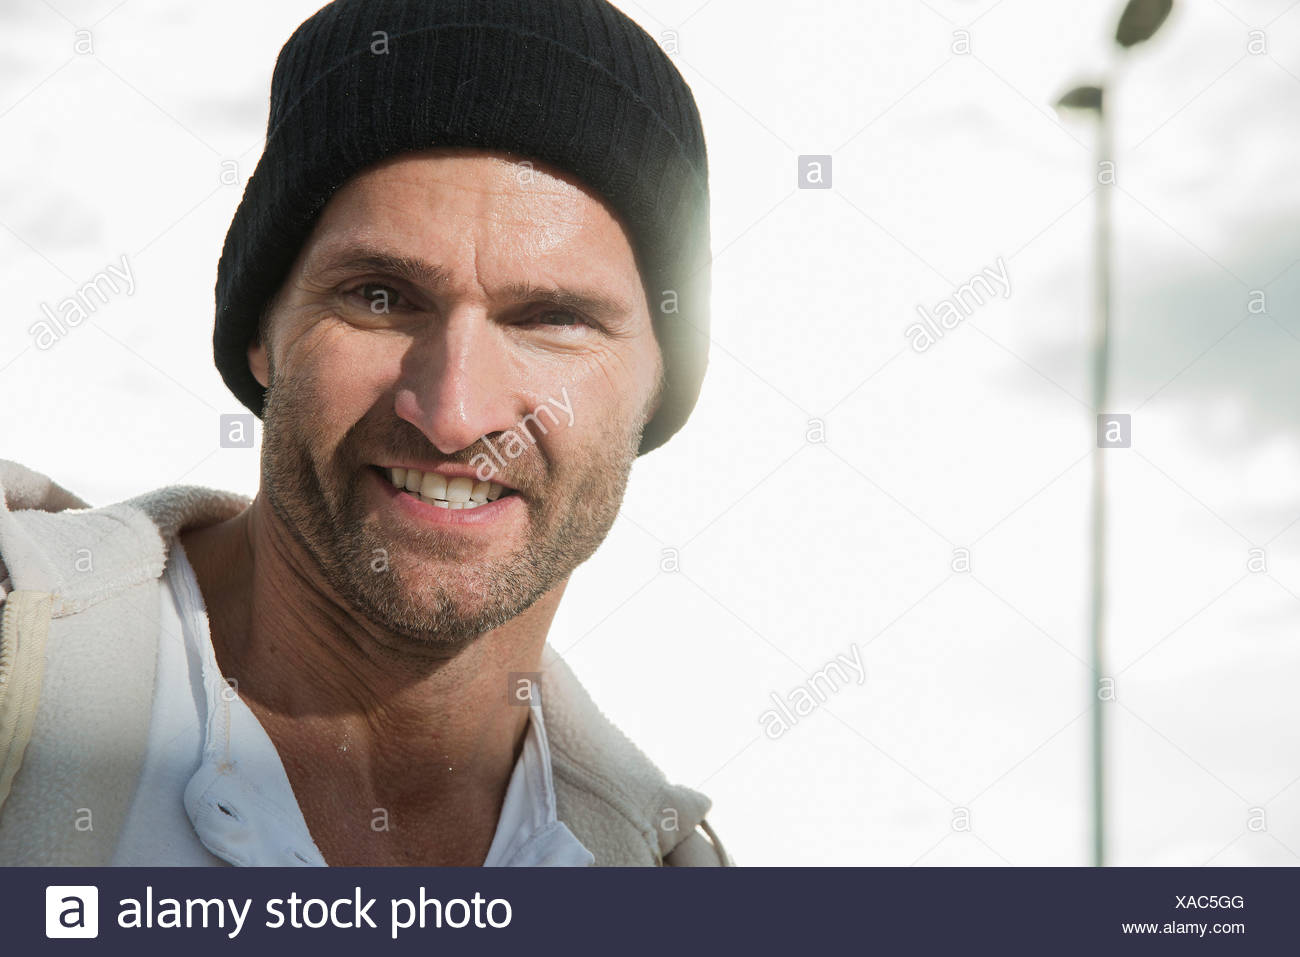 Black Beanie Hat High Resolution Stock Photography and Images - Alamy